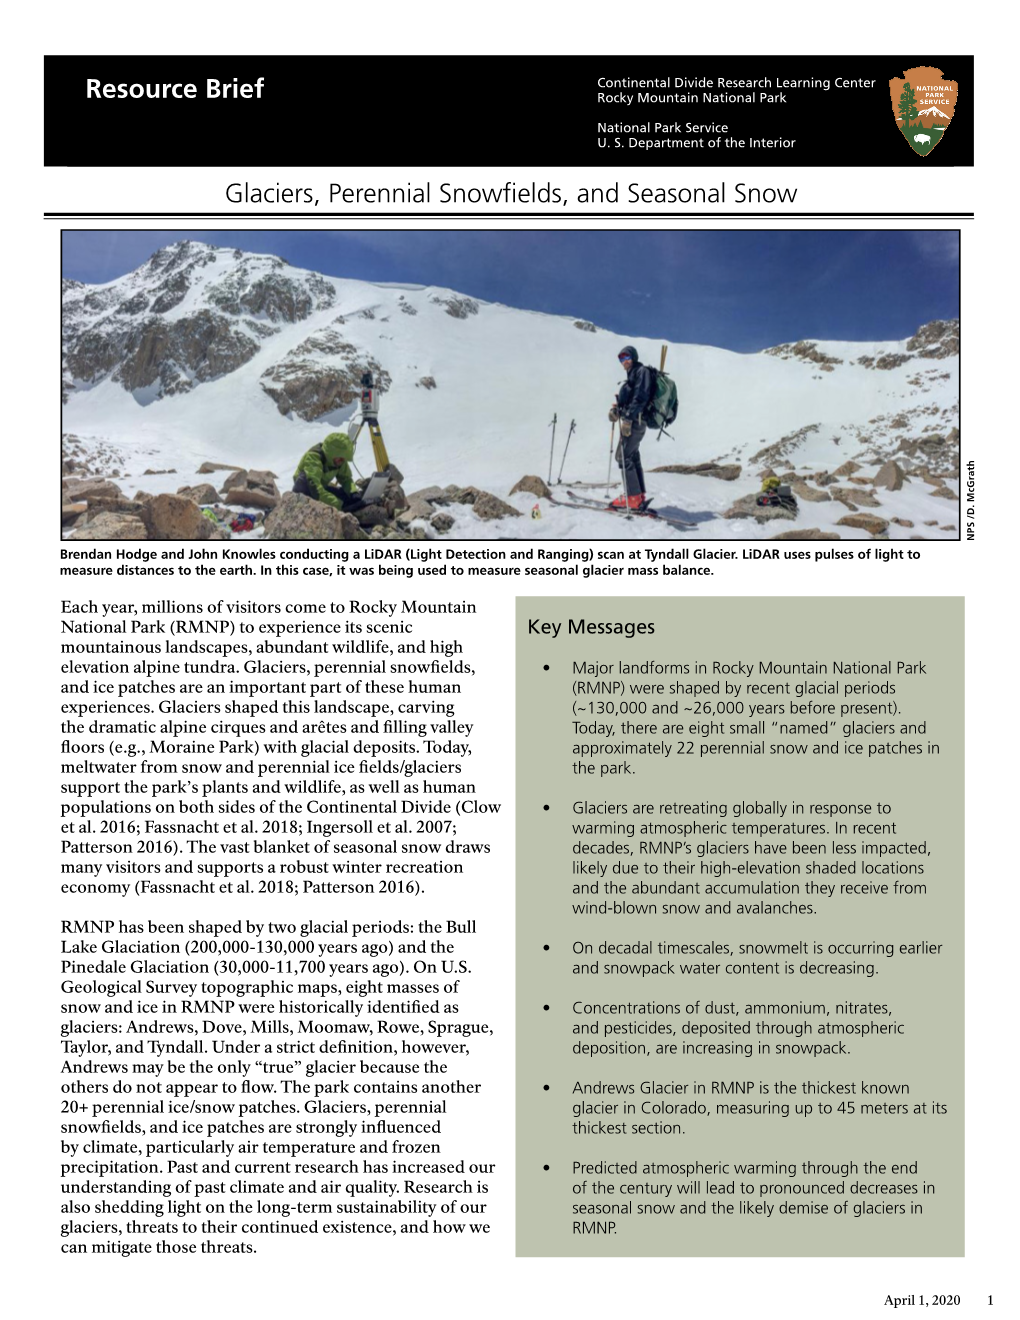 RMNP Resource Brief: Glaciers, Perennial Snowfields, And